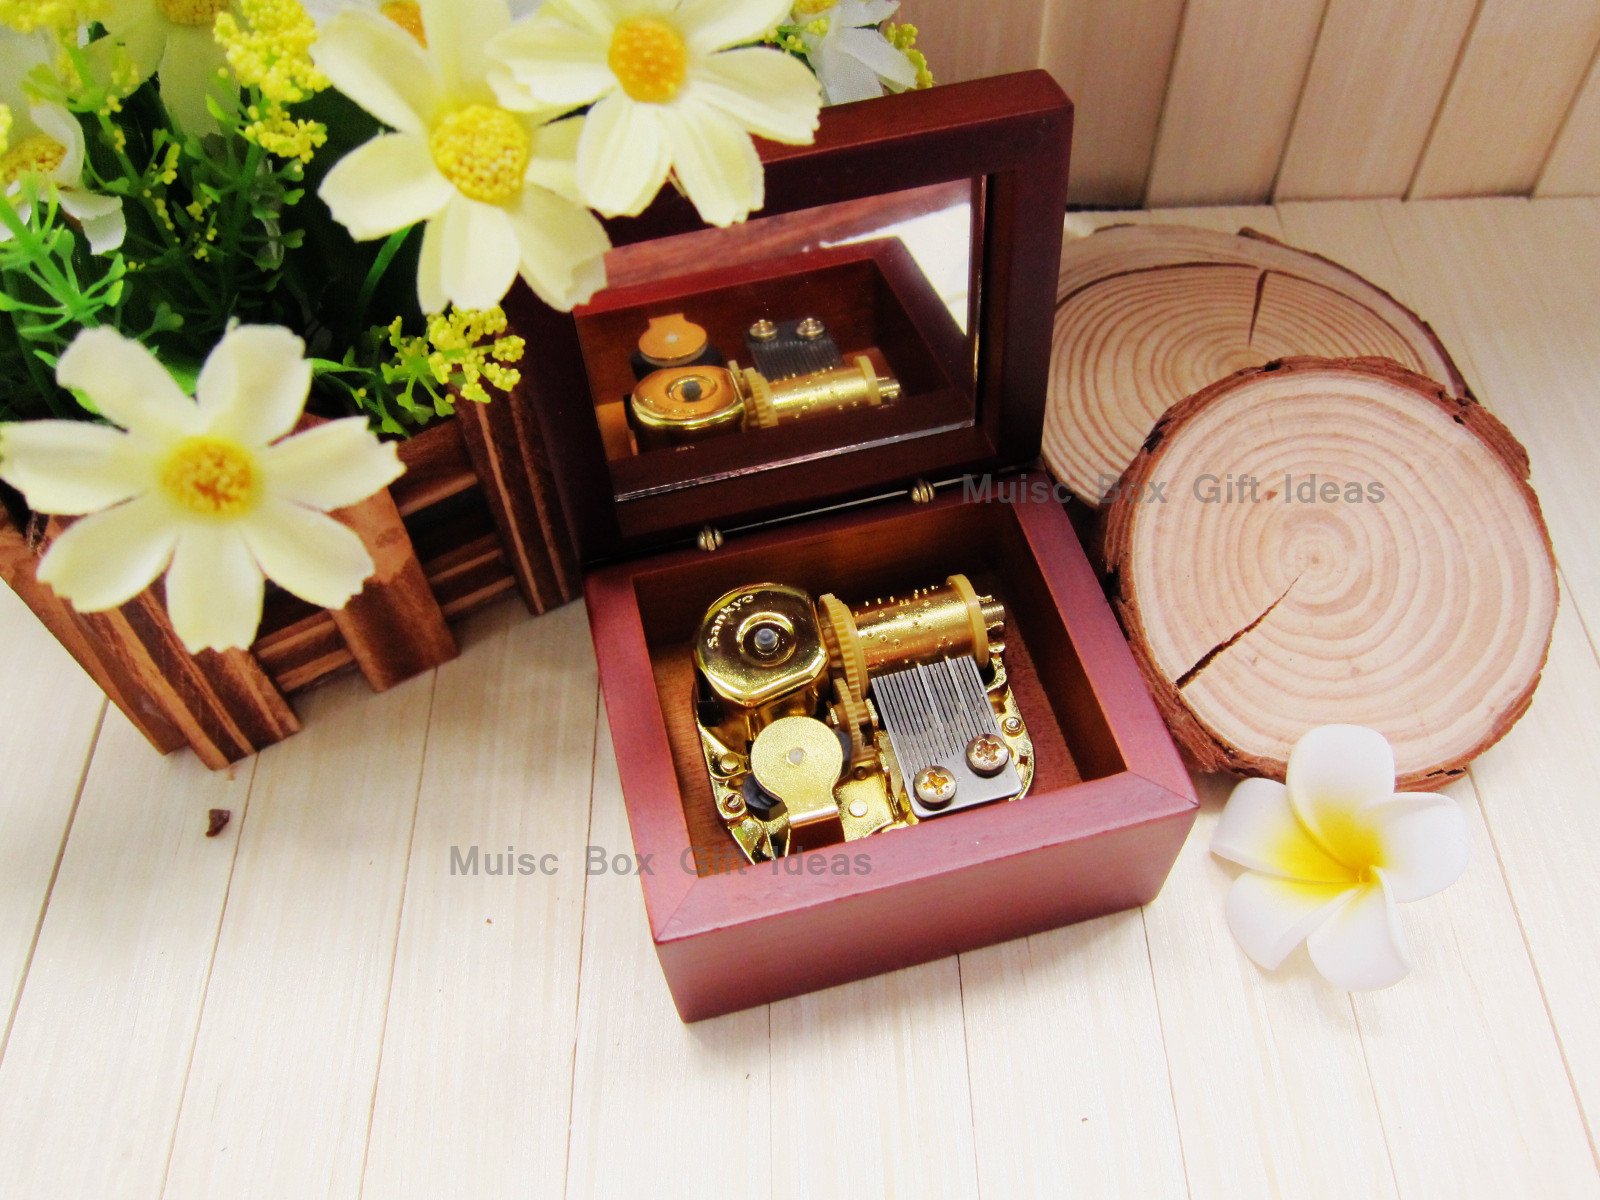 Disney The Lion King Can You Feel The Love Tonight 18-Note Music Box Gift (Sankyo Wooden Clockwork) - Music Box Gift Ideas